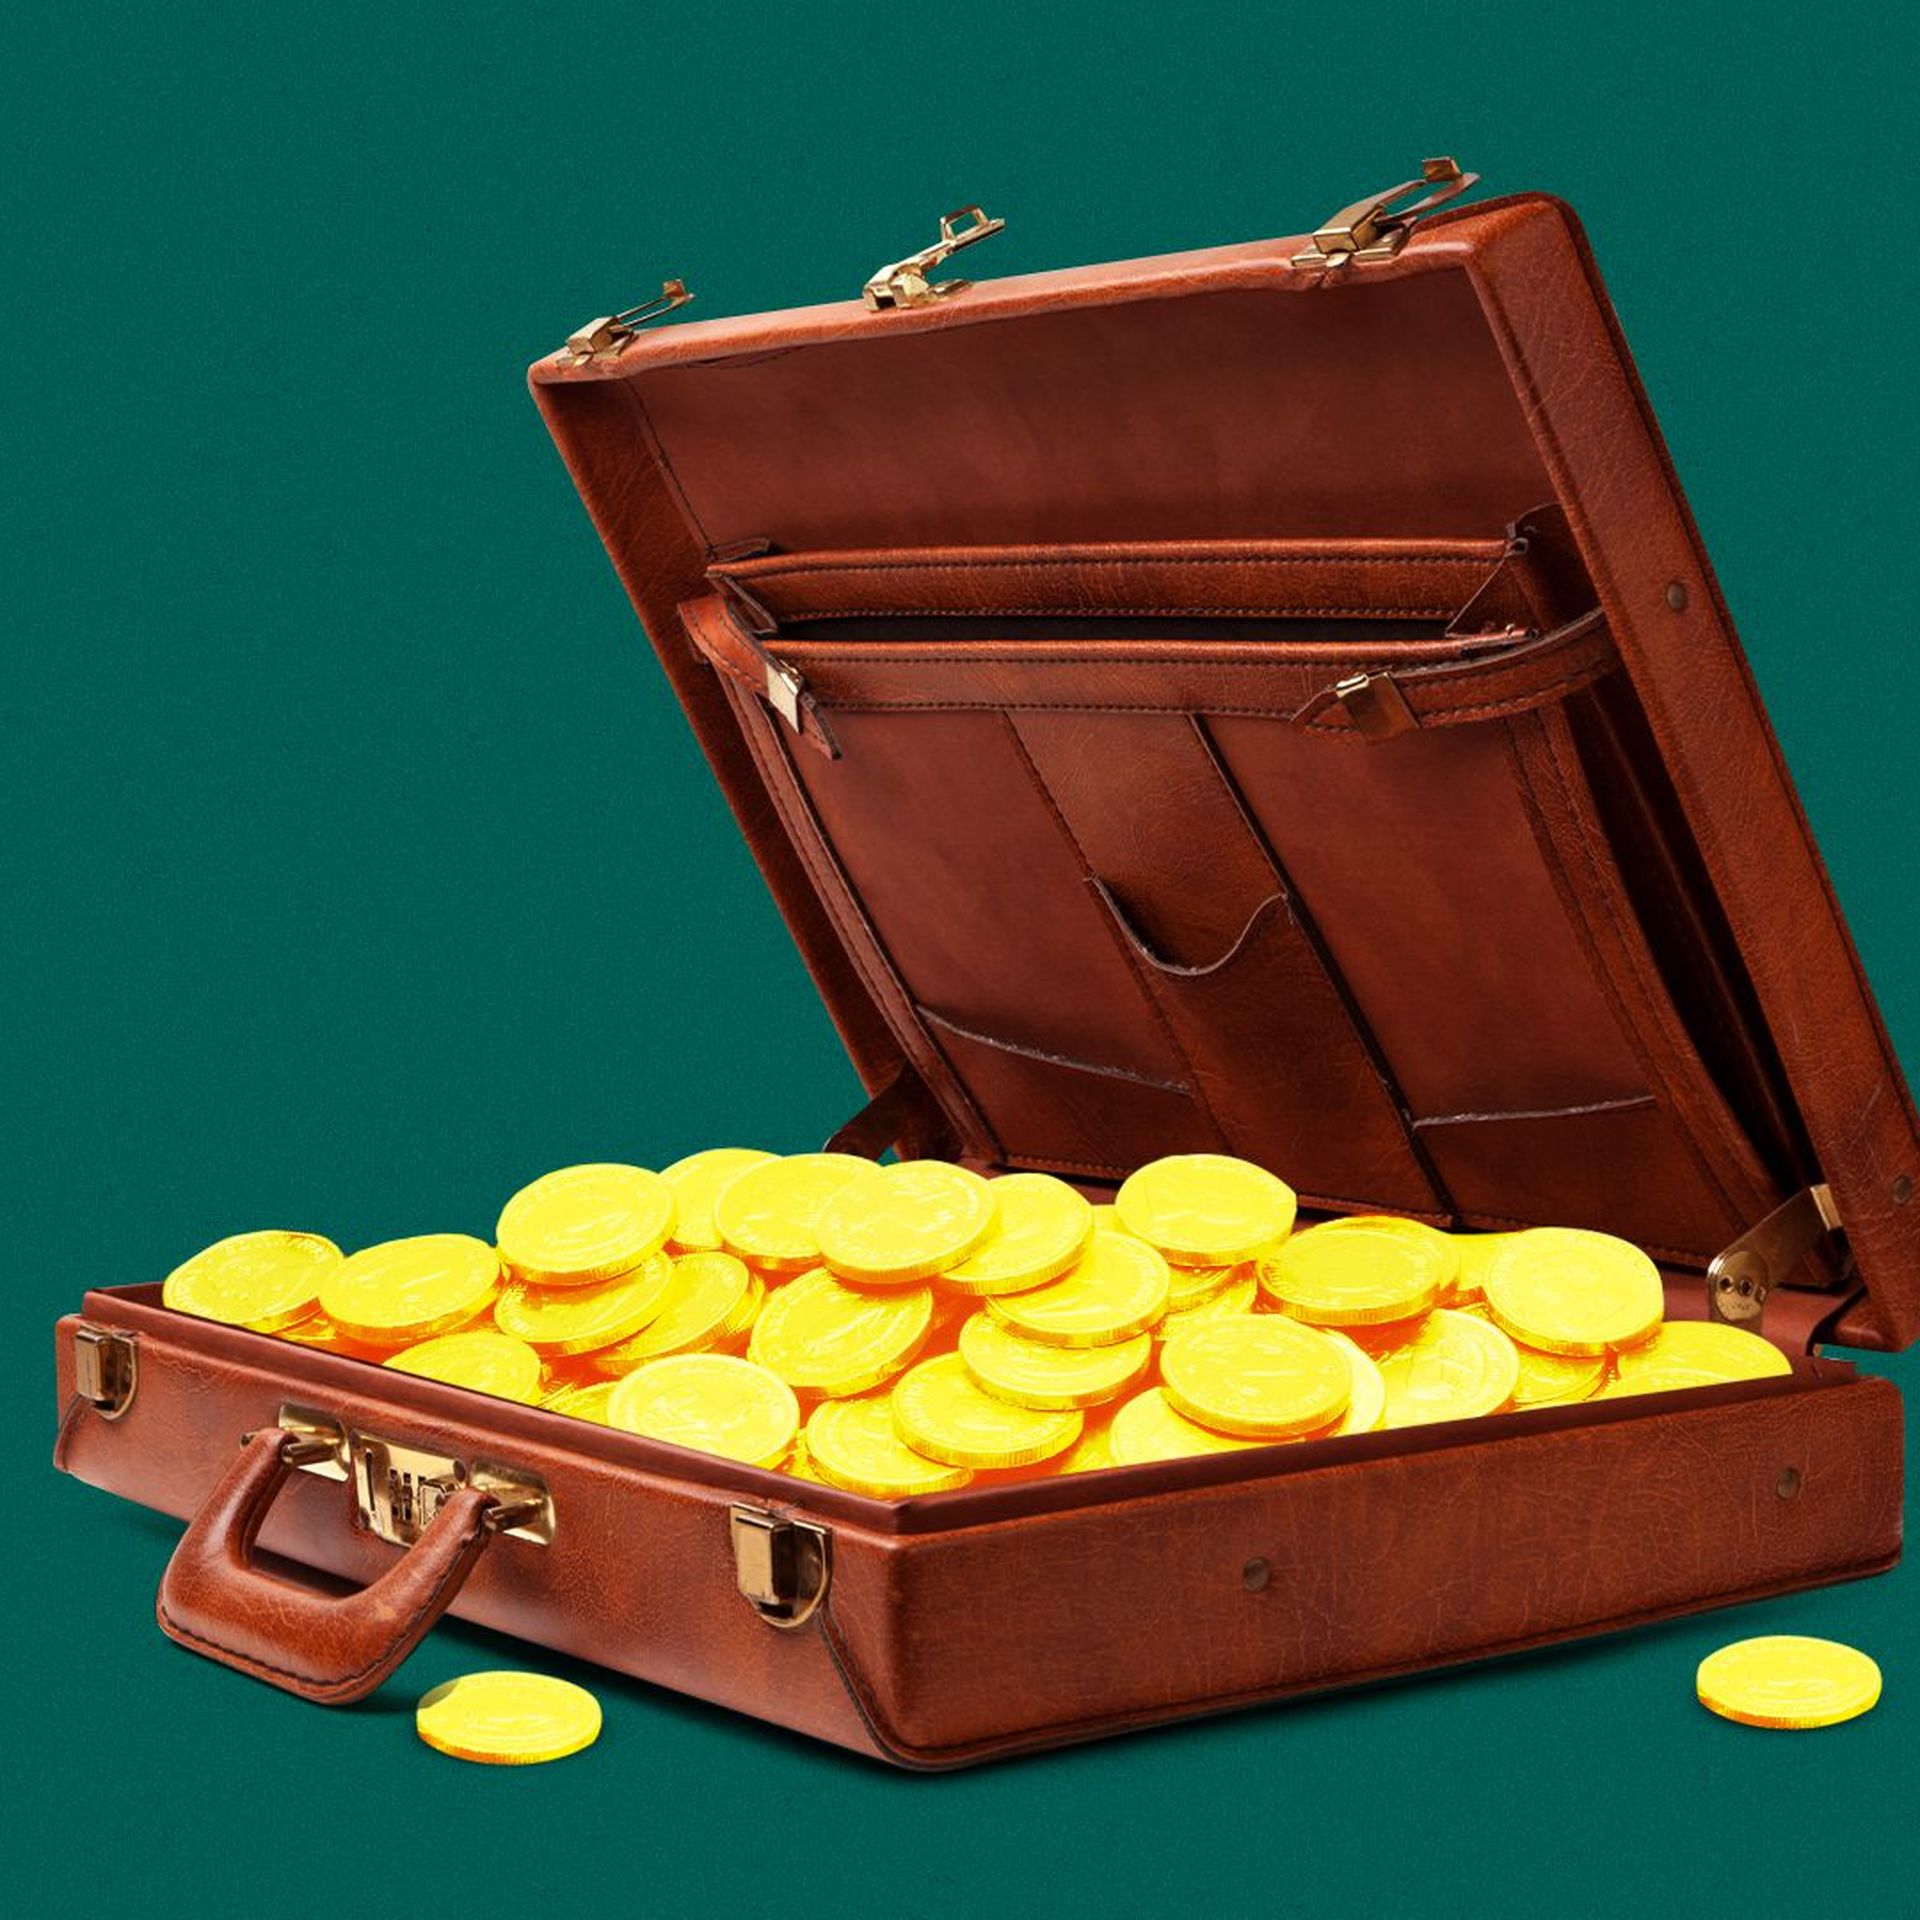 Illustration of an open briefcase full of coins.